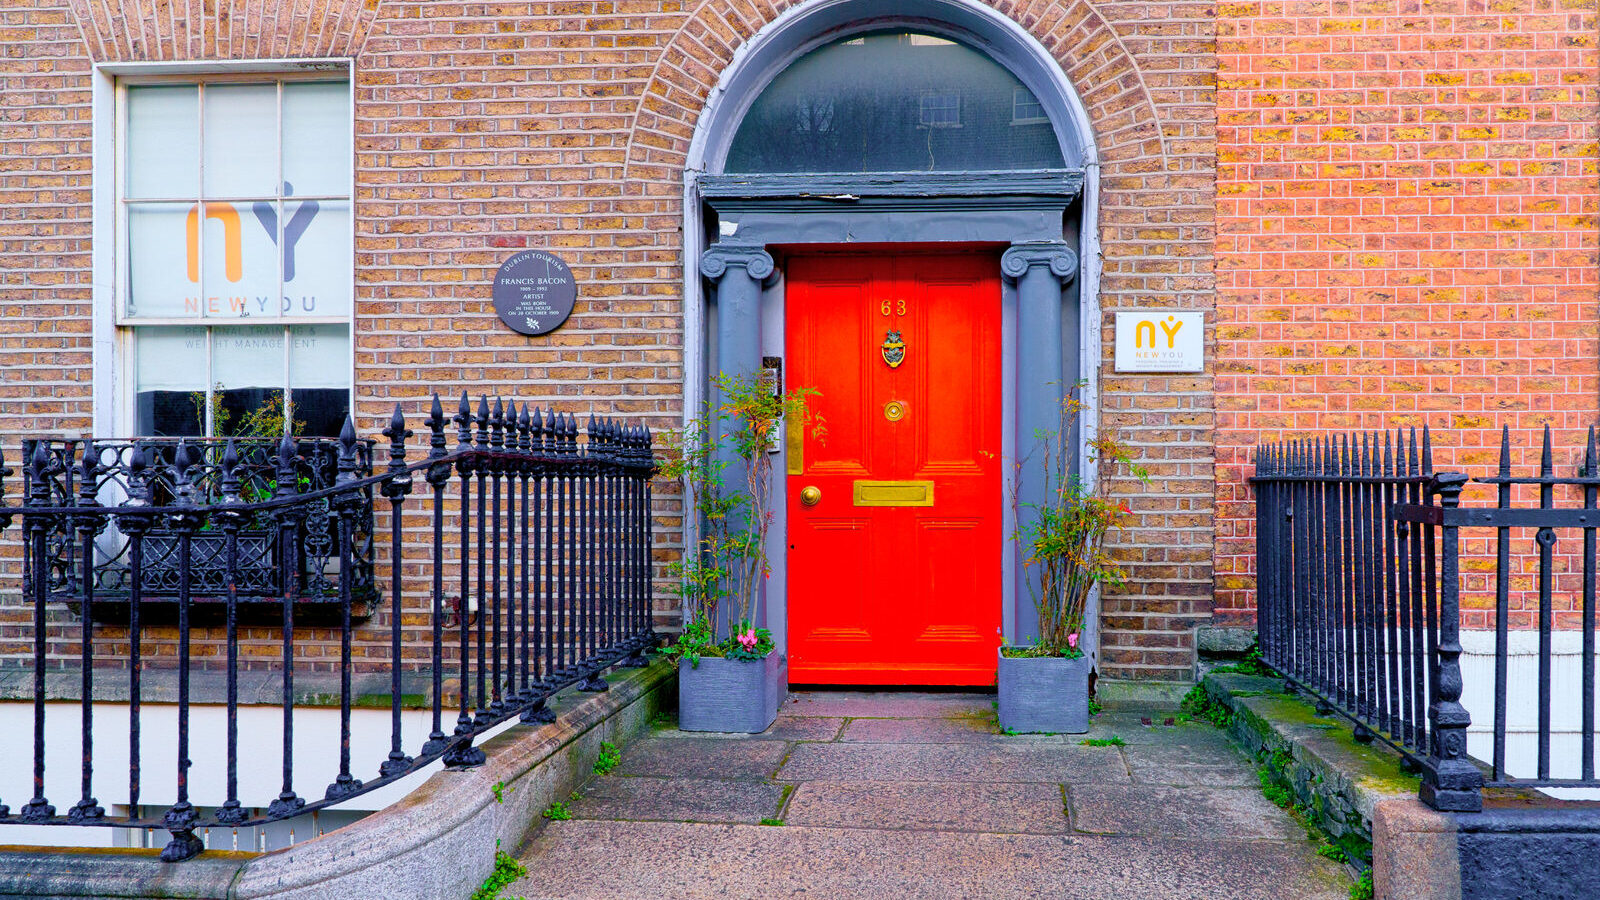 FRANCIS BACON LIVED HERE [HE WAS BORN IN 1909 AT NUMBER 63 LOWER BAGGOT STREET]-228117-1